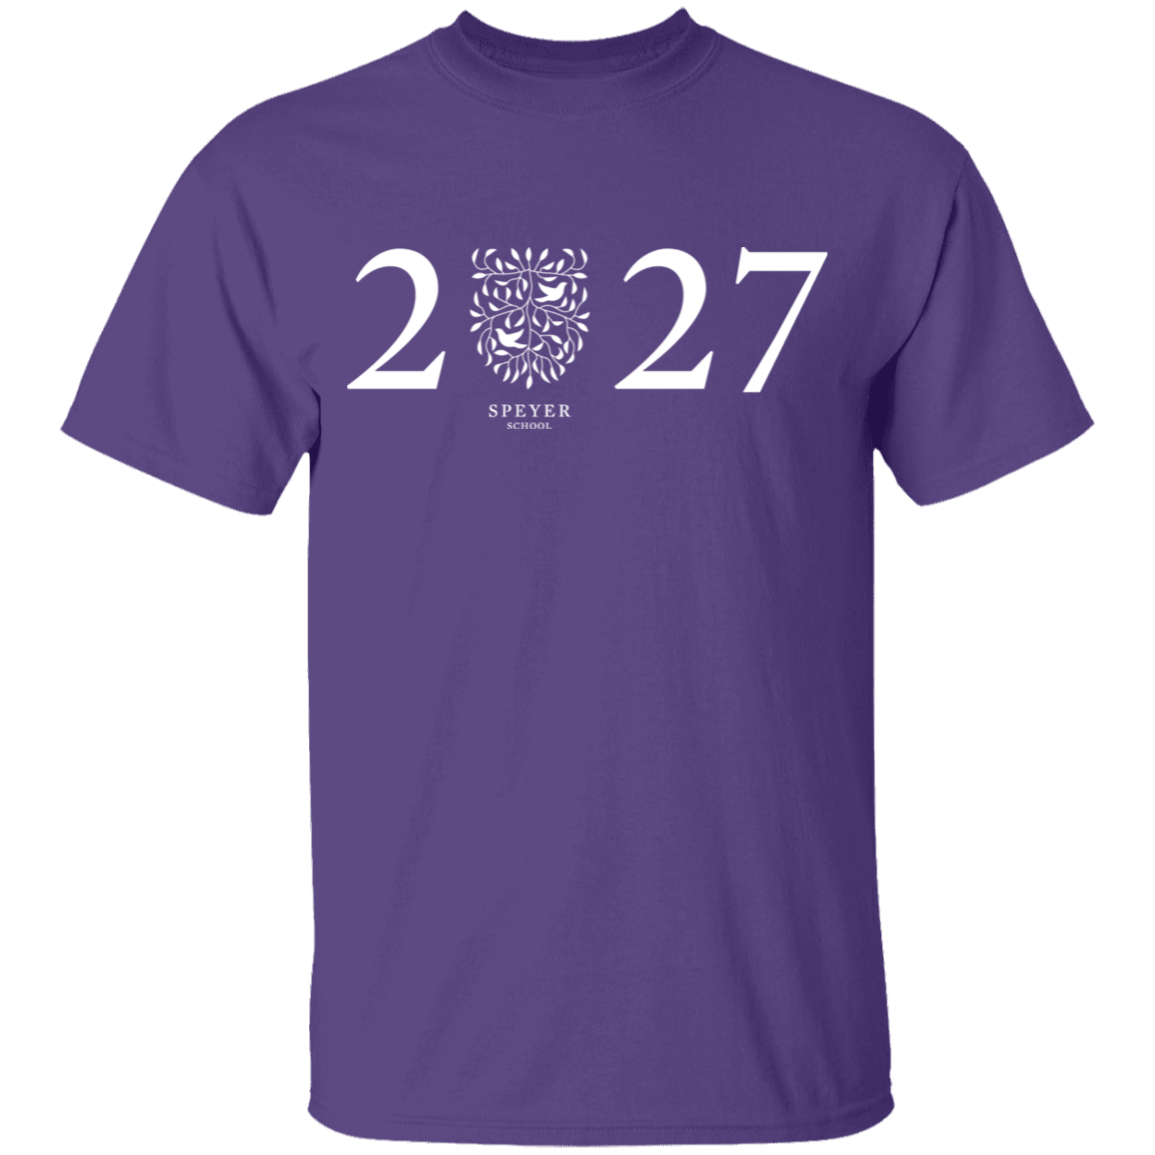 Class of 2027 T-Shirt, Youth Sizes